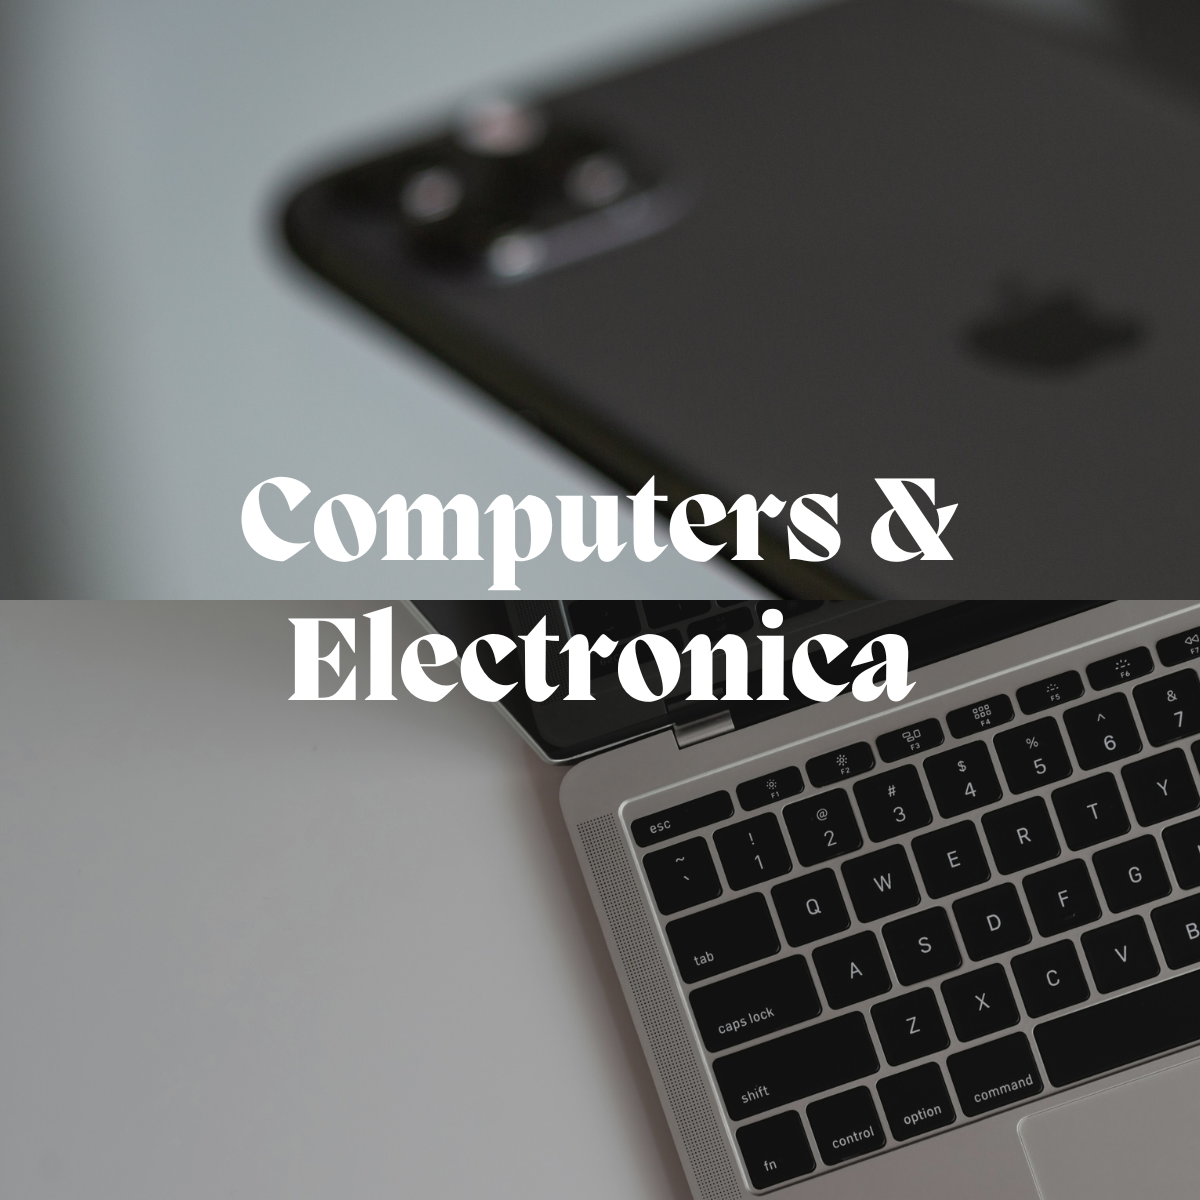 Computers & Electronica